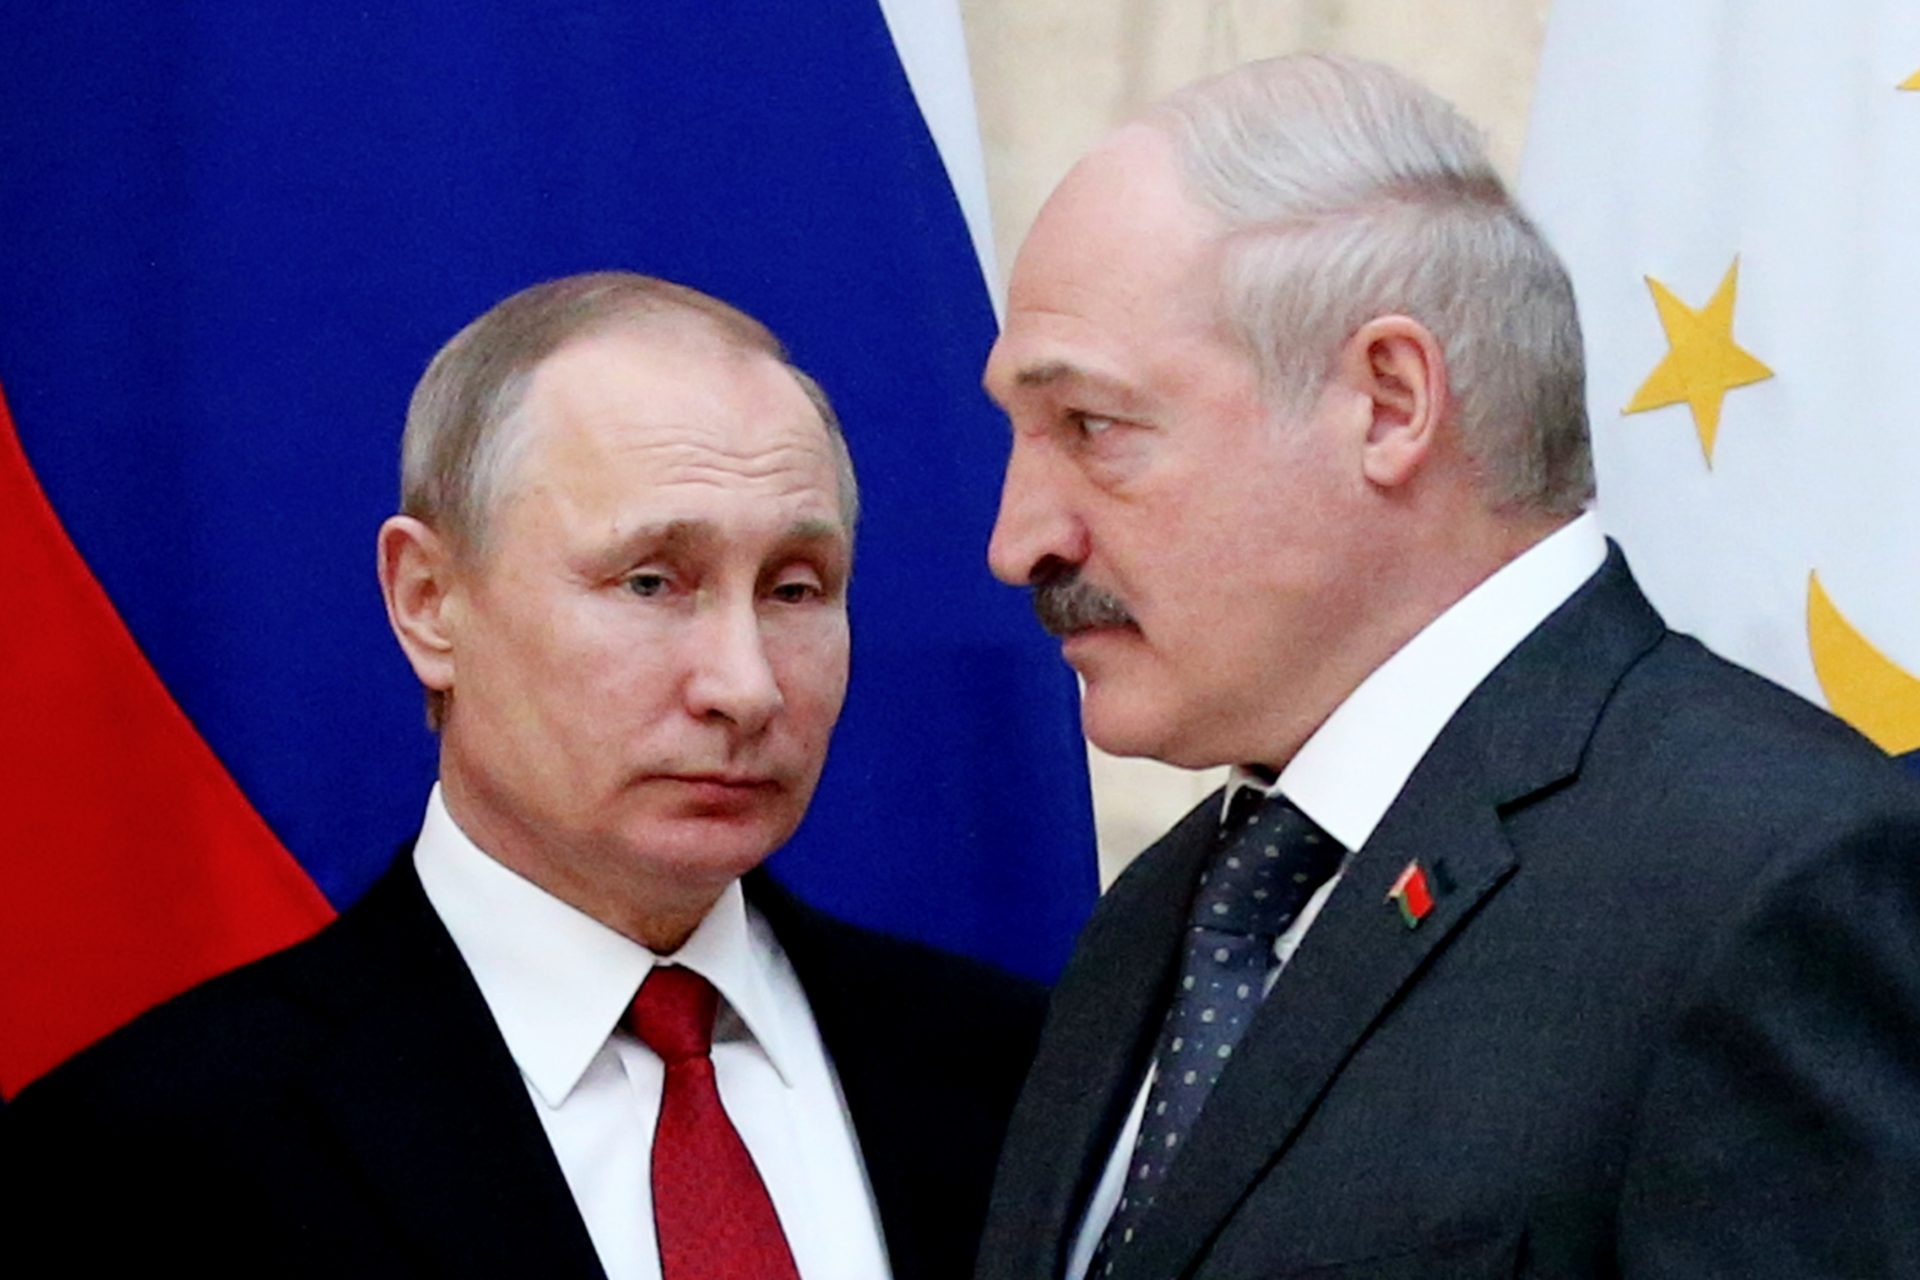 “Without Putin, there is no Lukashenko”